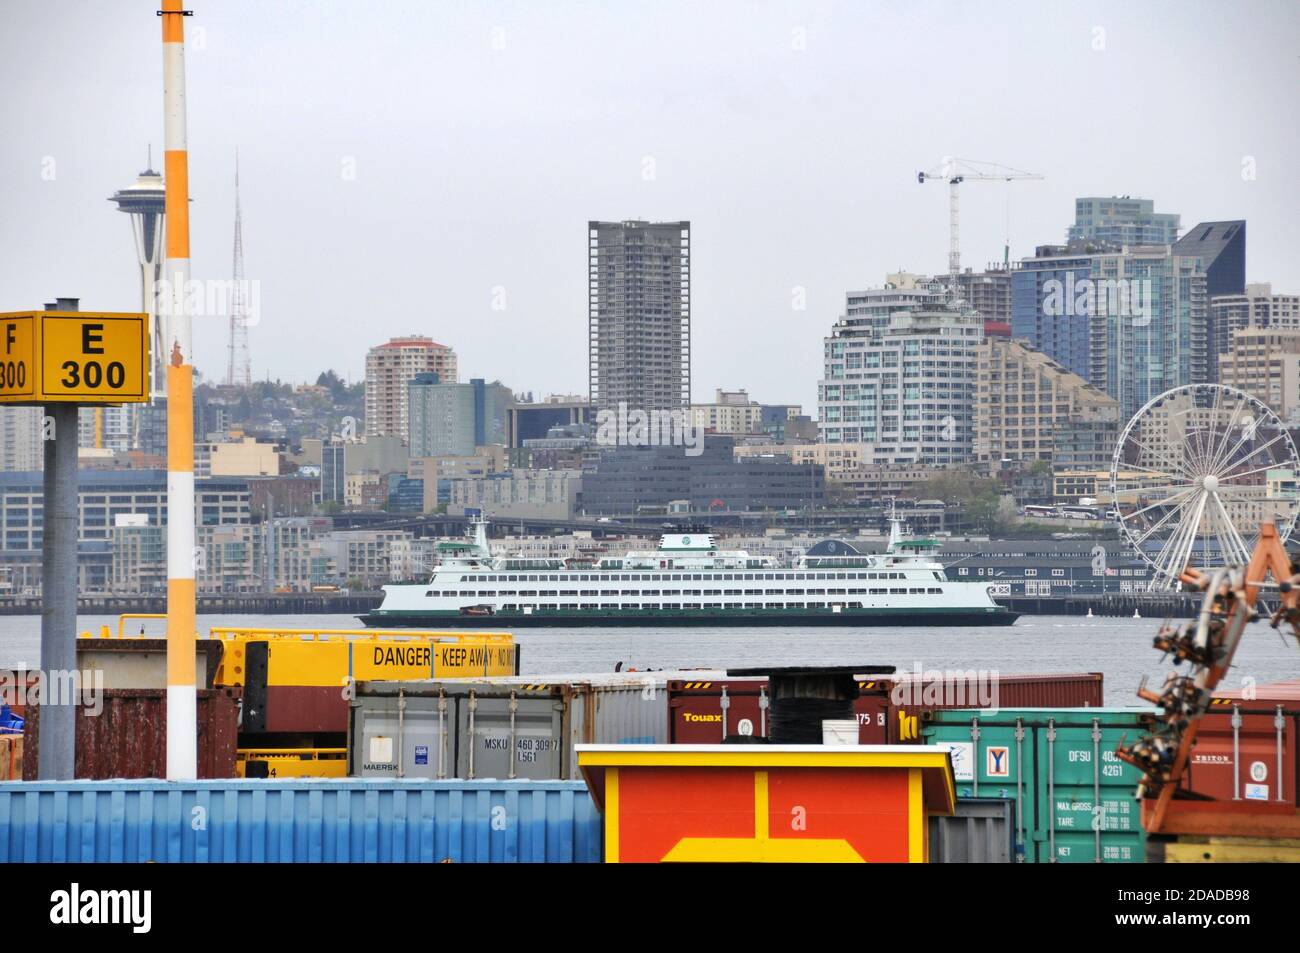 View of shipping dock and Seattle cityscape in the background including Space Needle, Ferris wheel and WA ferry, WA, USA. Stock Photo